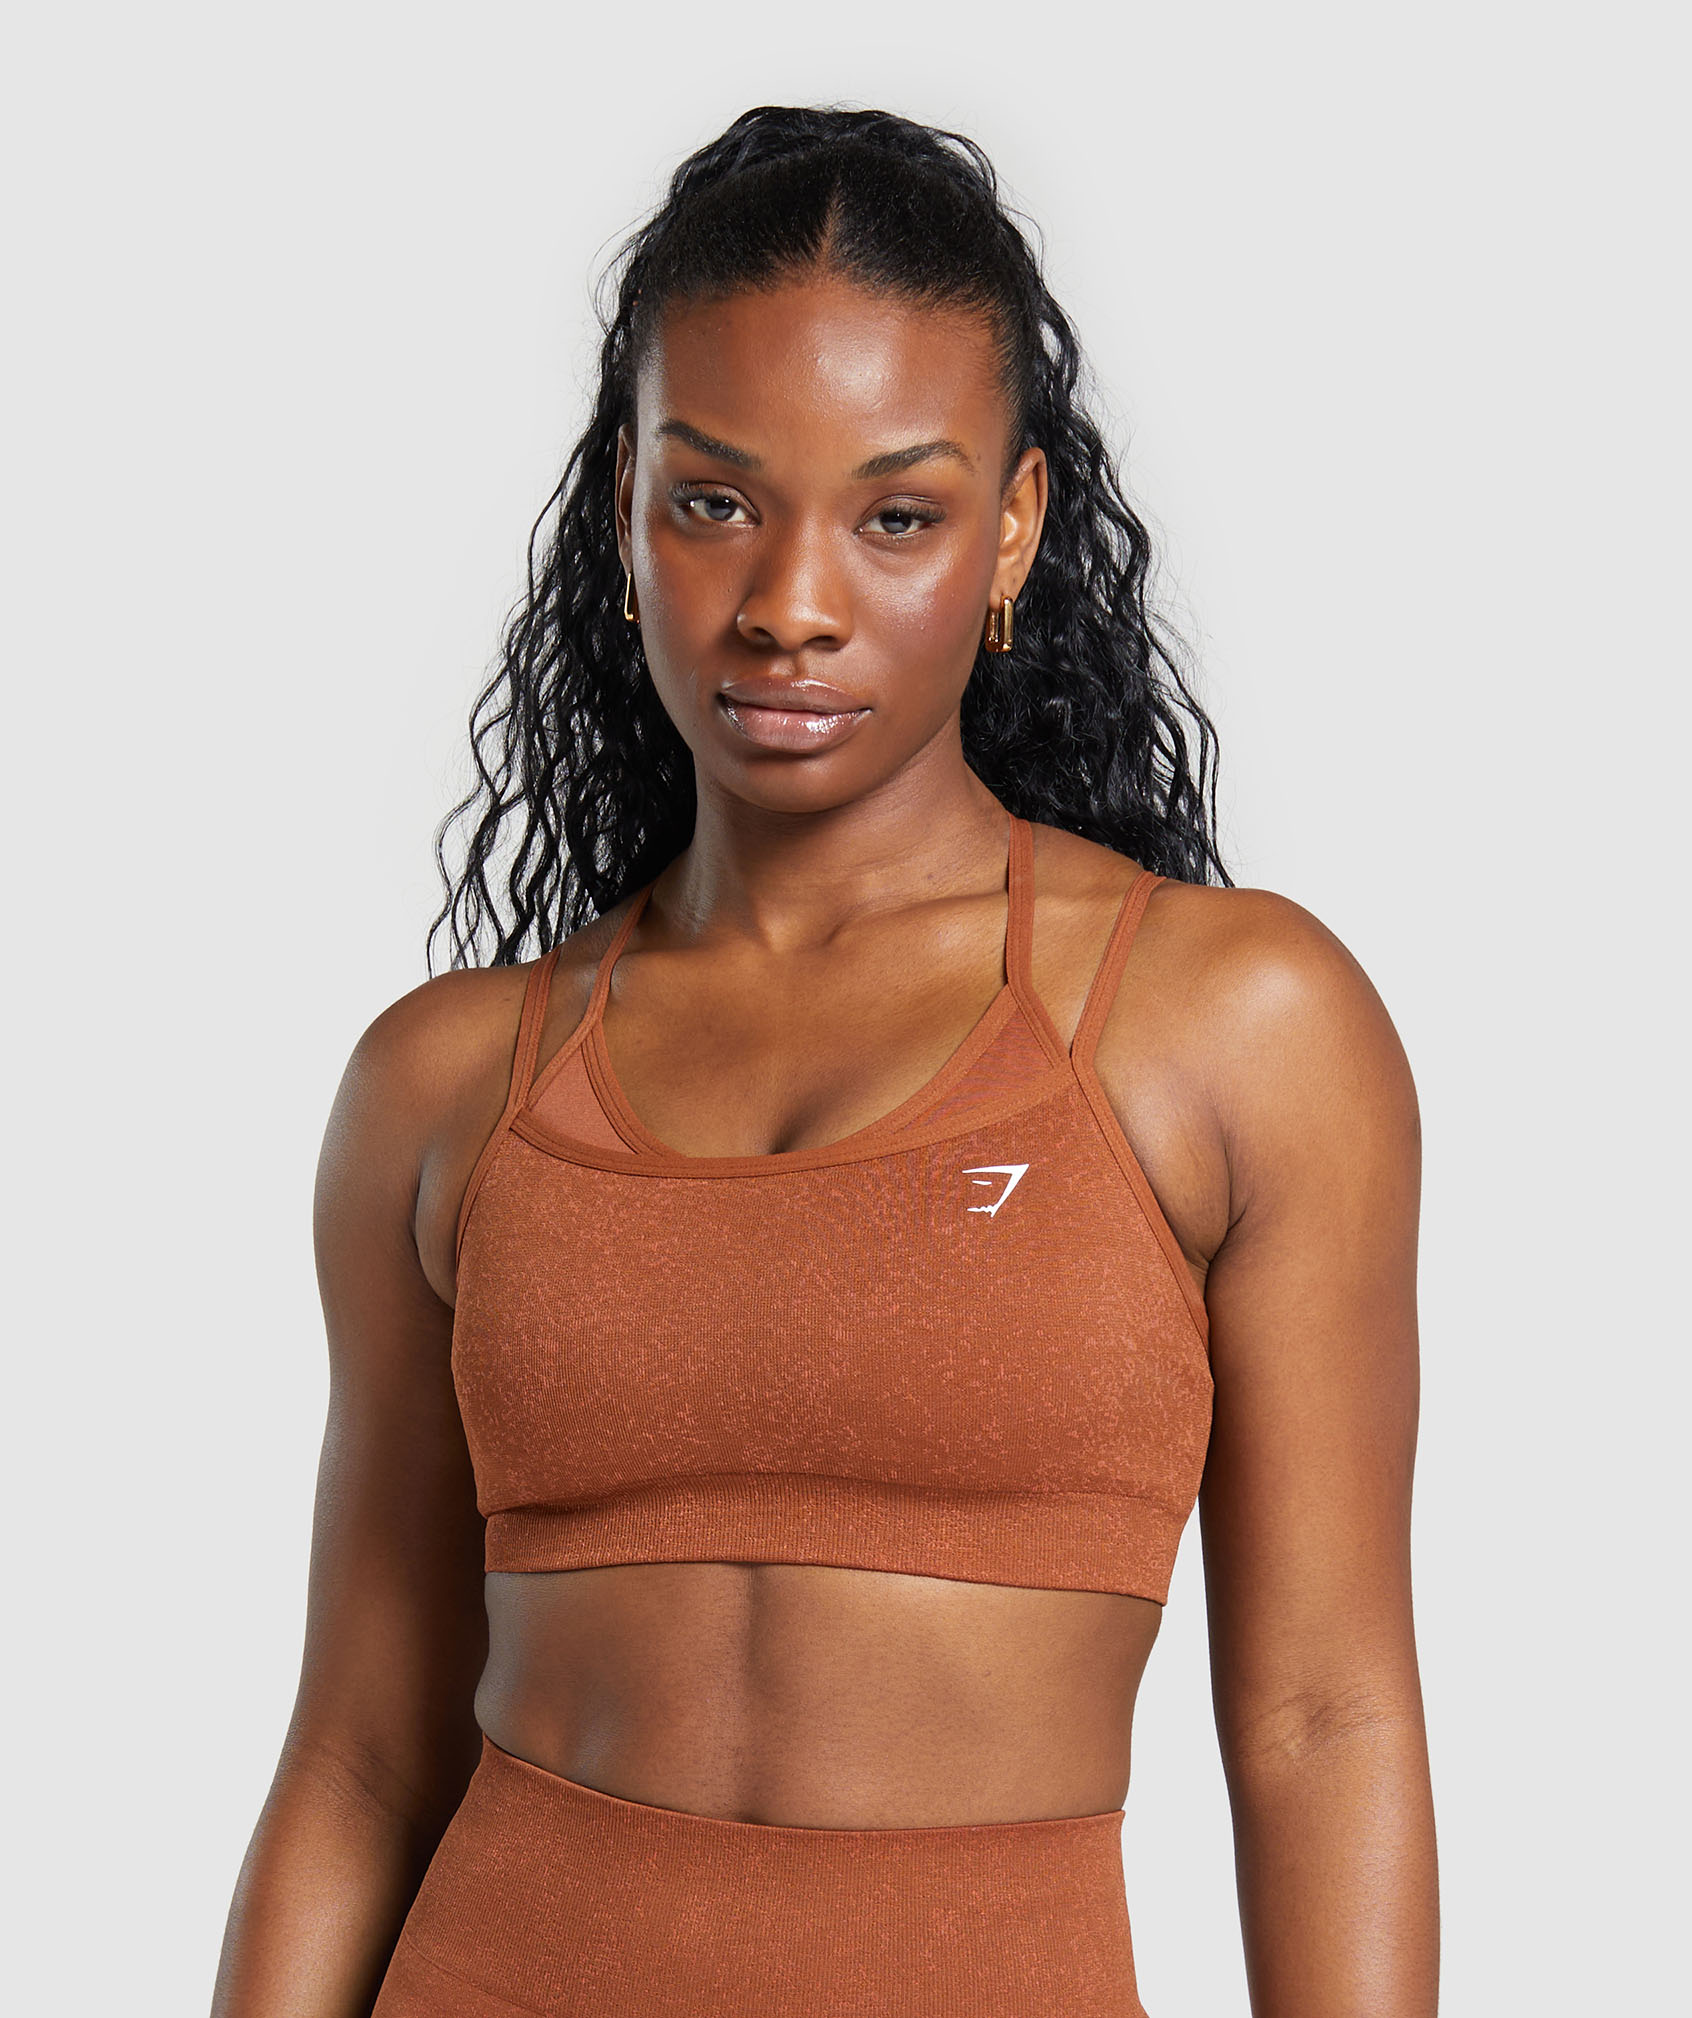 Women's - Fitted Fit Sport Bras in Blue or Red or Brown for Training